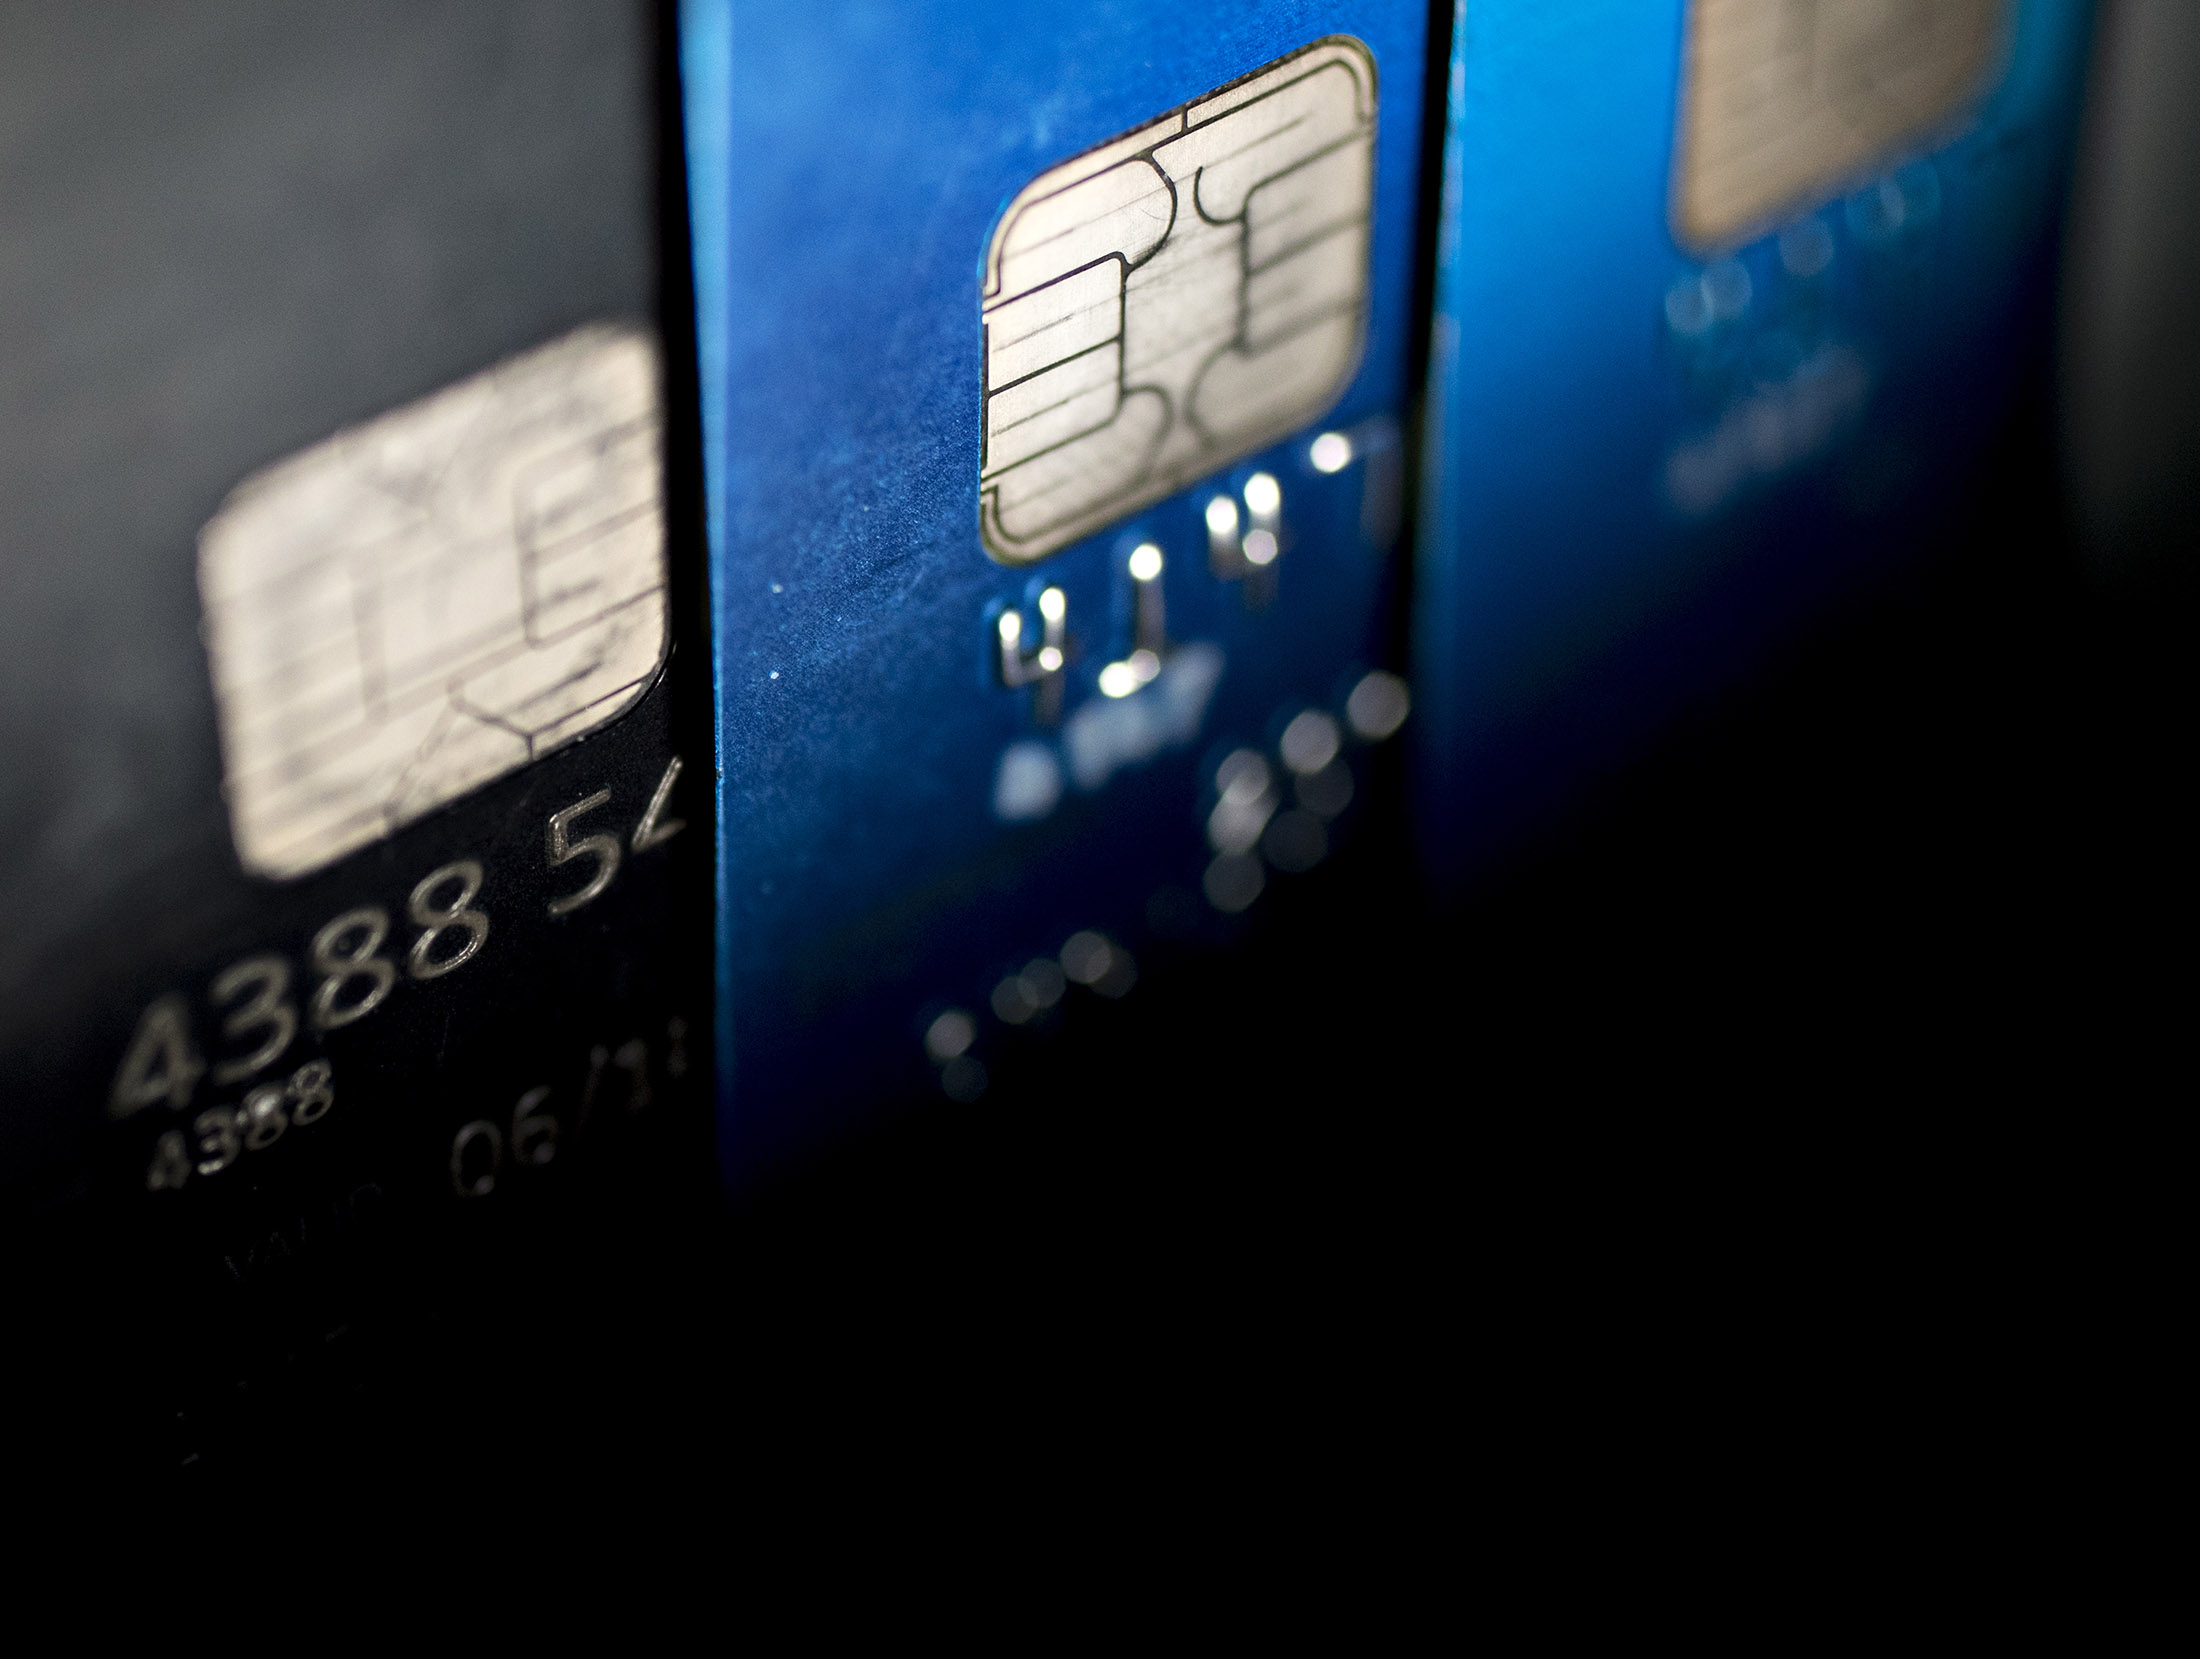 Visa Inc. chip credit cards are arranged for a photograph in Washington, D.C., U.S., on Friday, Oct. 21, 2016. Visa is expected to release fourth-quarter earnings figures on October 24.